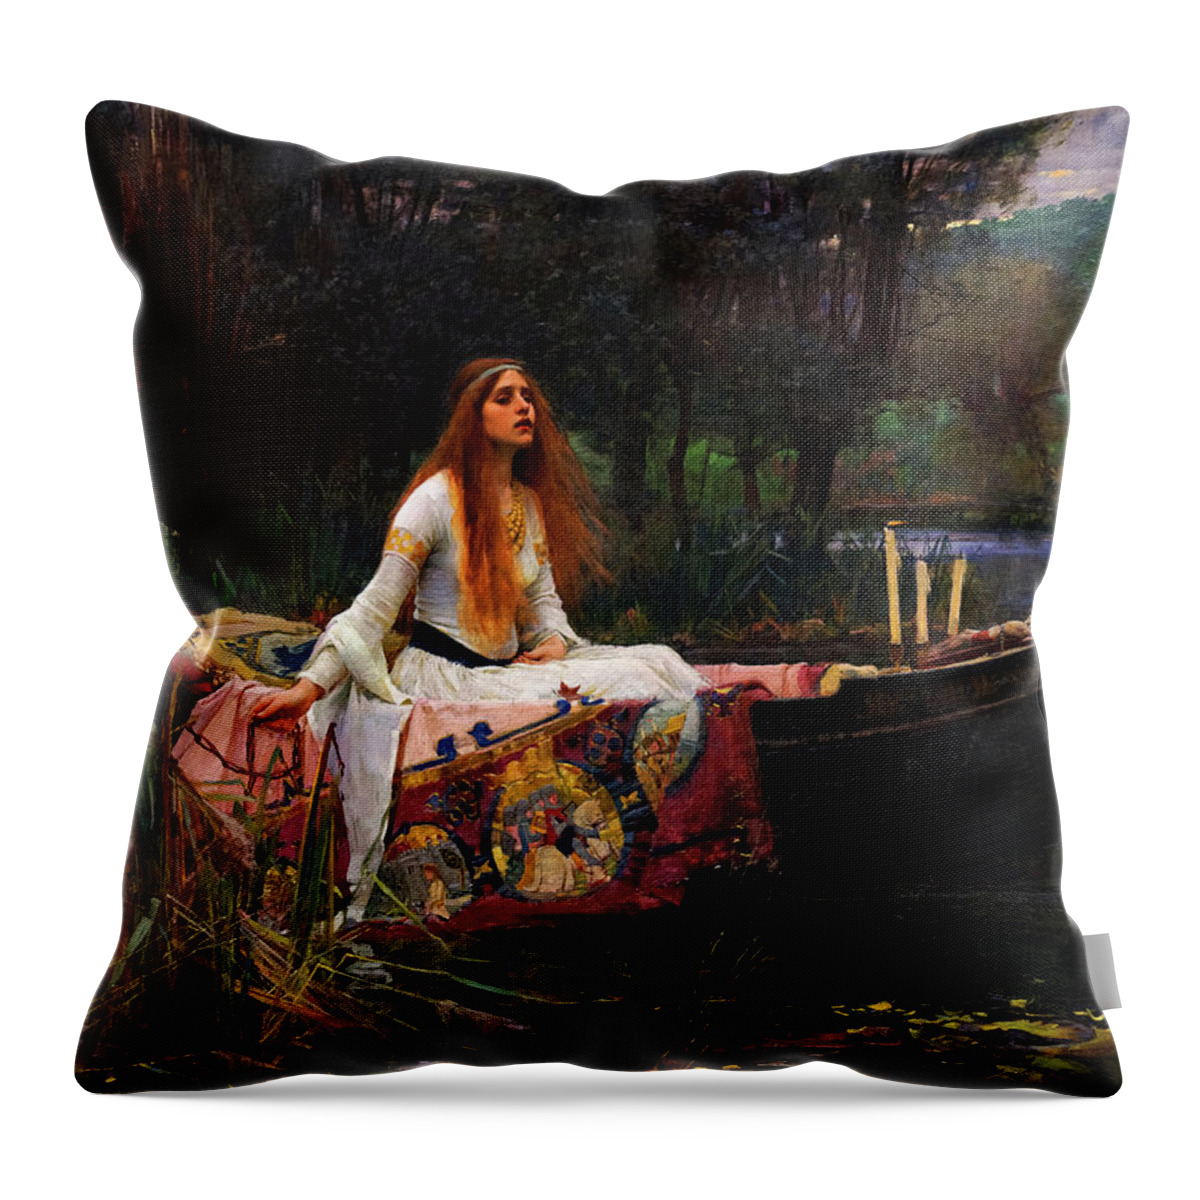 The Lady Of Shalott Throw Pillow featuring the painting The Lady of Shalott by John William Waterhouse